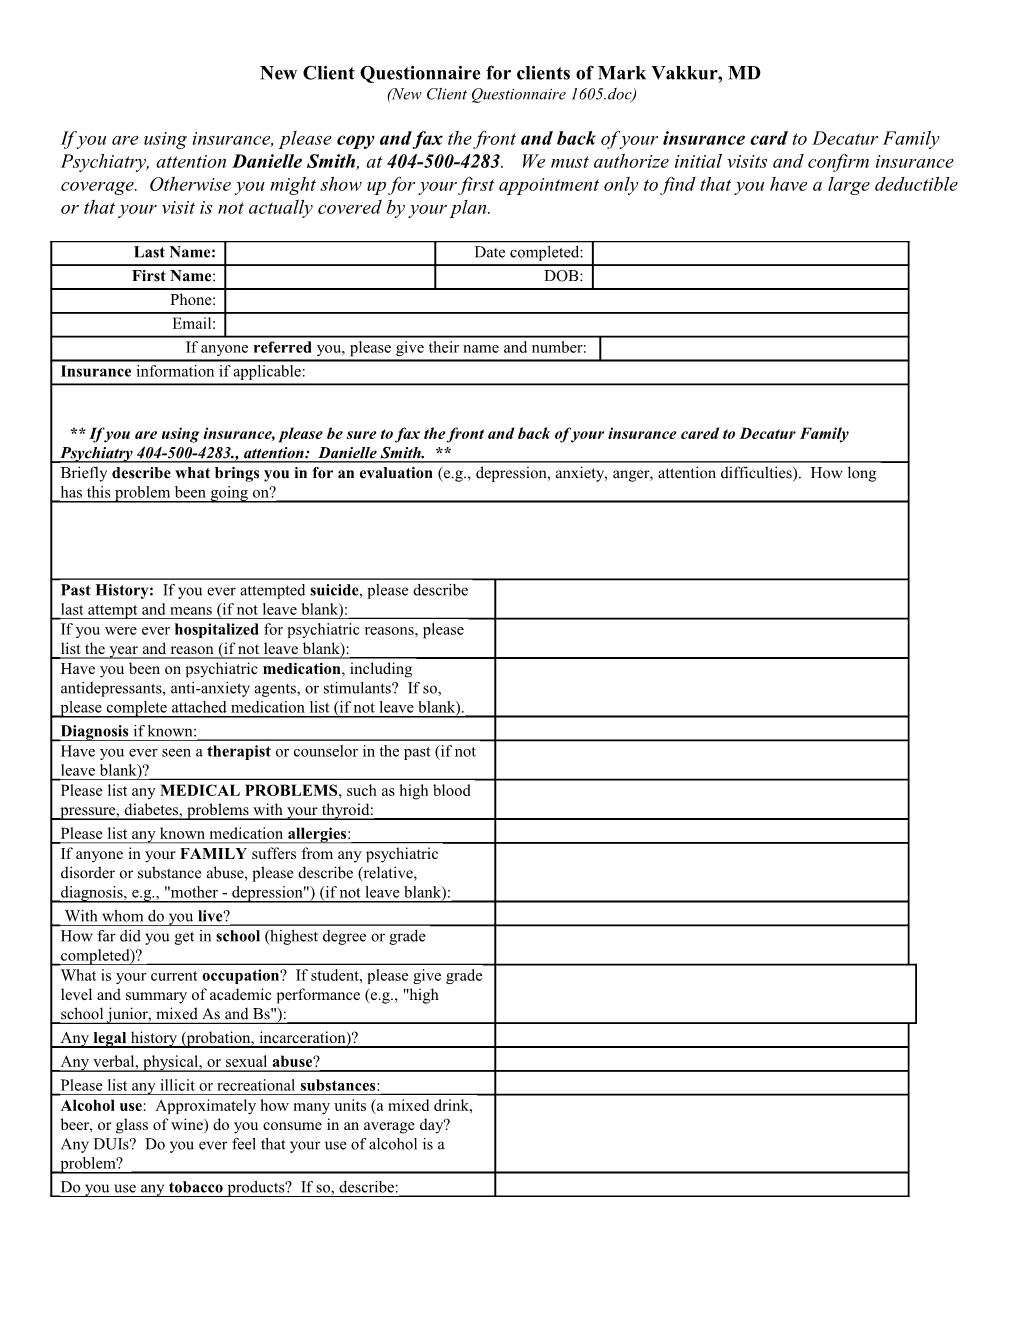 New Client Questionnaire for Clients of Mark Vakkur, MD